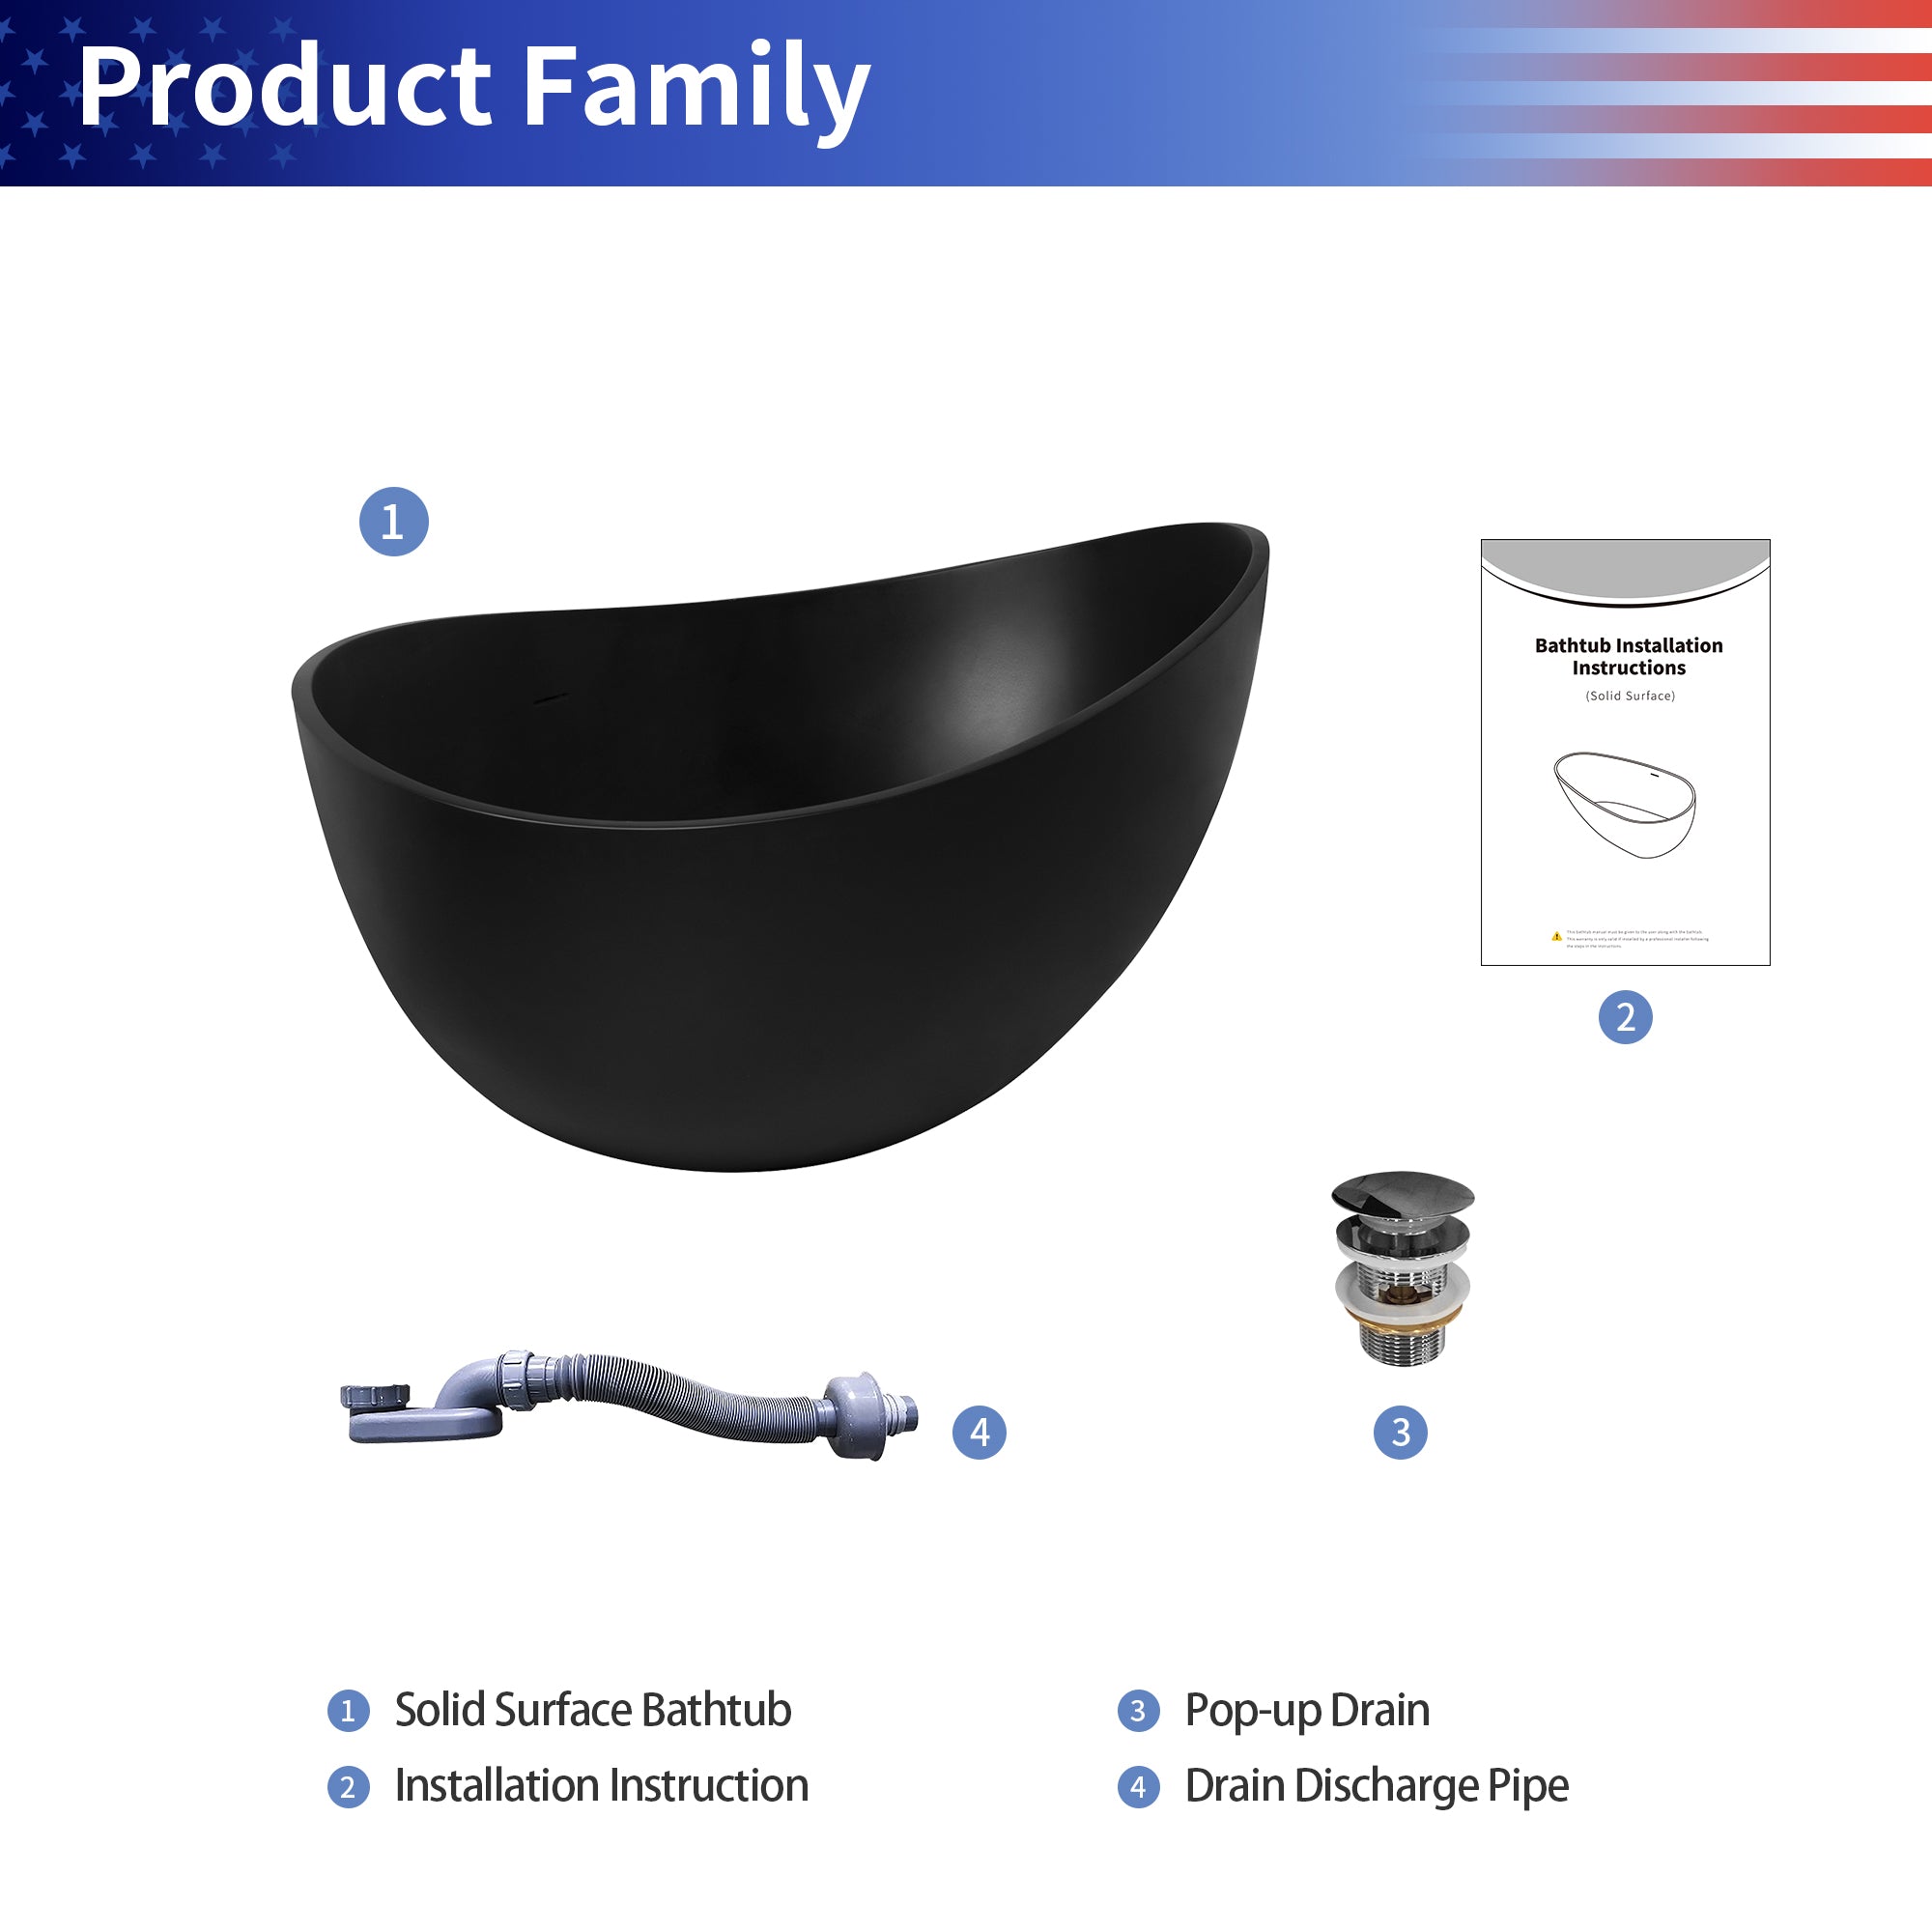 63" Oval Shaped Freestanding Solid Surface Soaking Bathtub with Overflow in Black RX-S04-63MB